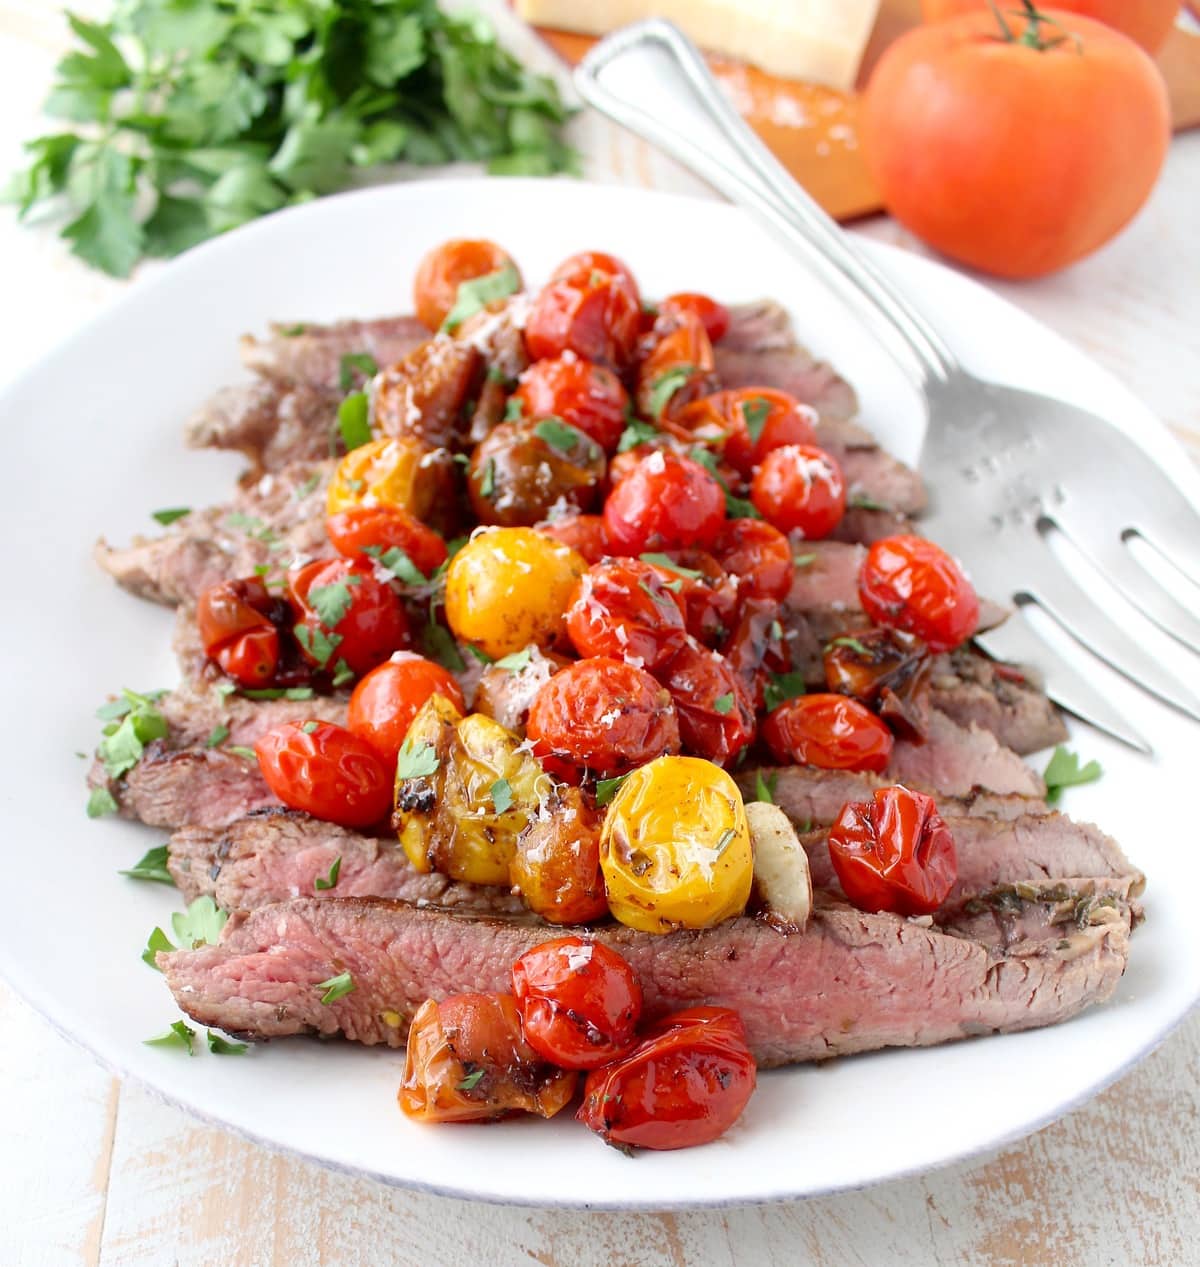 Grilled Flank Steak with Garlic & Rosemary